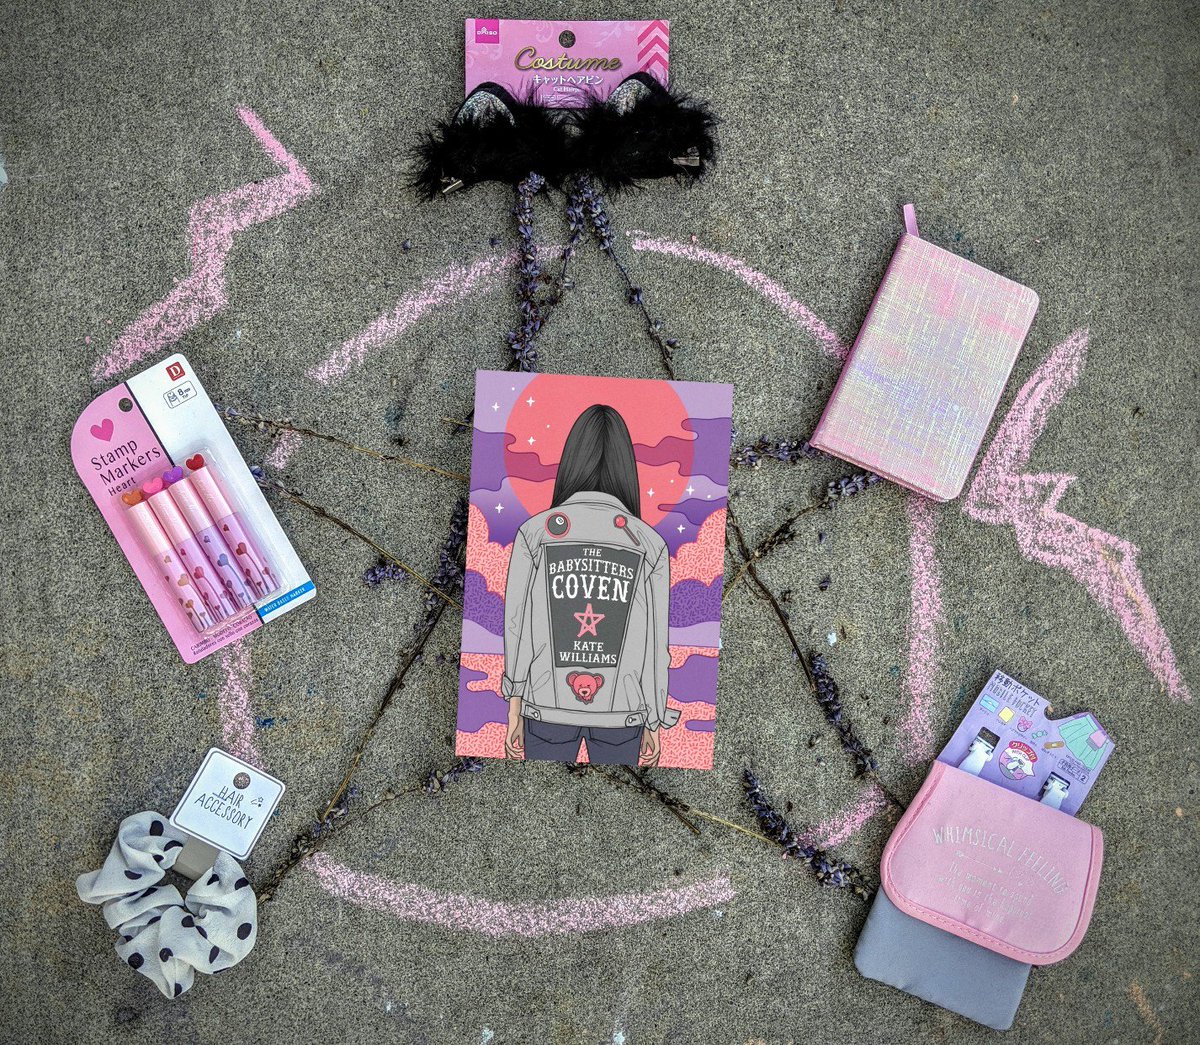 Kicking off #13DaysofHollyween with a giveaway for a fav #novel19s, THE BABYSITTER'S COVEN 💄✨💜

To enter, RT/follow me & @heykatewilliams to win a copy + 

💄Holo cat ears 
💄Holo notebook 
💄Clip pocket 
💄Dot scrunchie 
💄Heart stamps 

US only, ends 10PM PST Oct. 20th